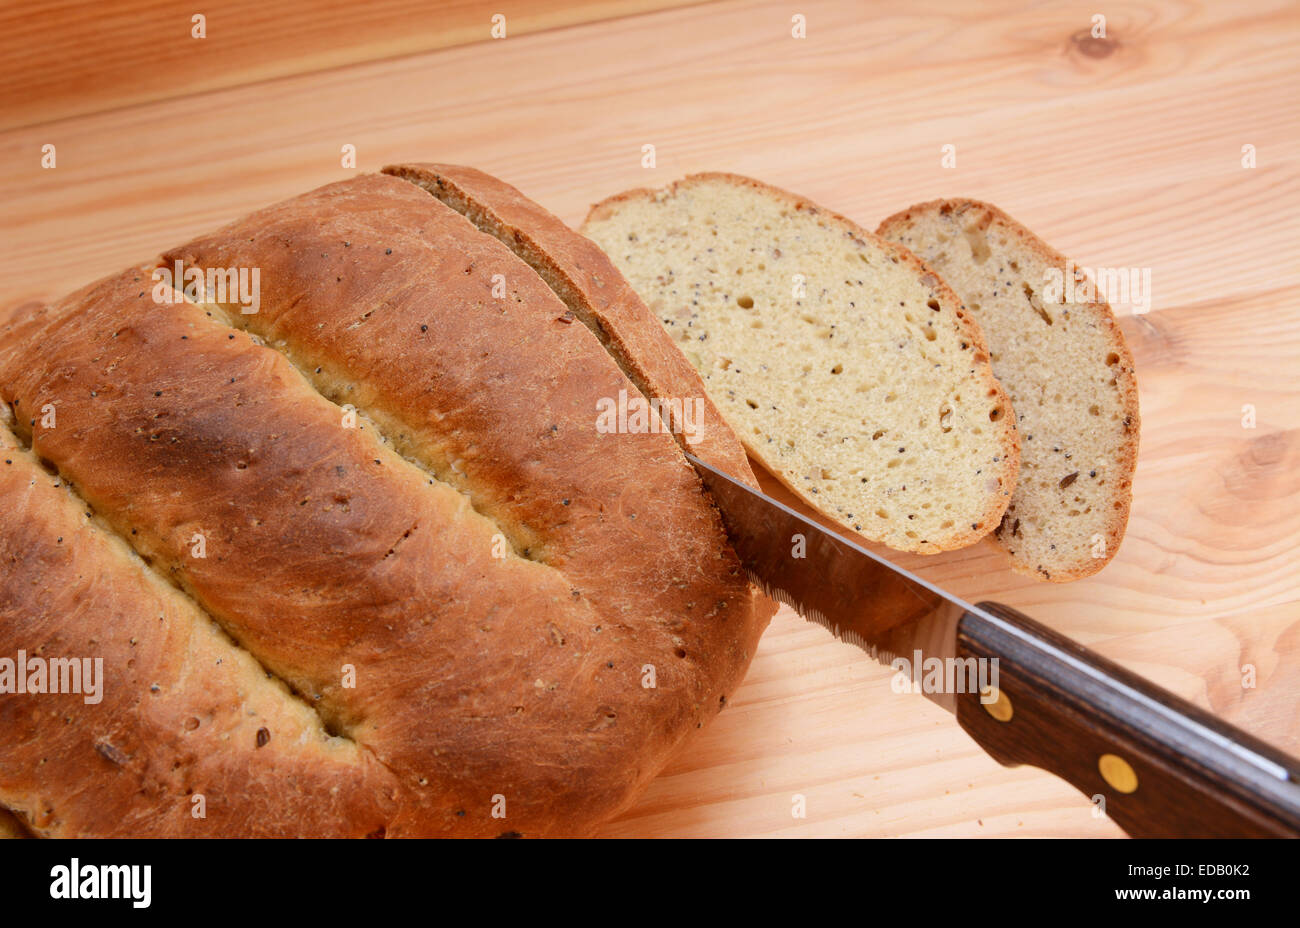 Cutting slices of bread from a freshly baked loaf on a wooden table Stock Photo